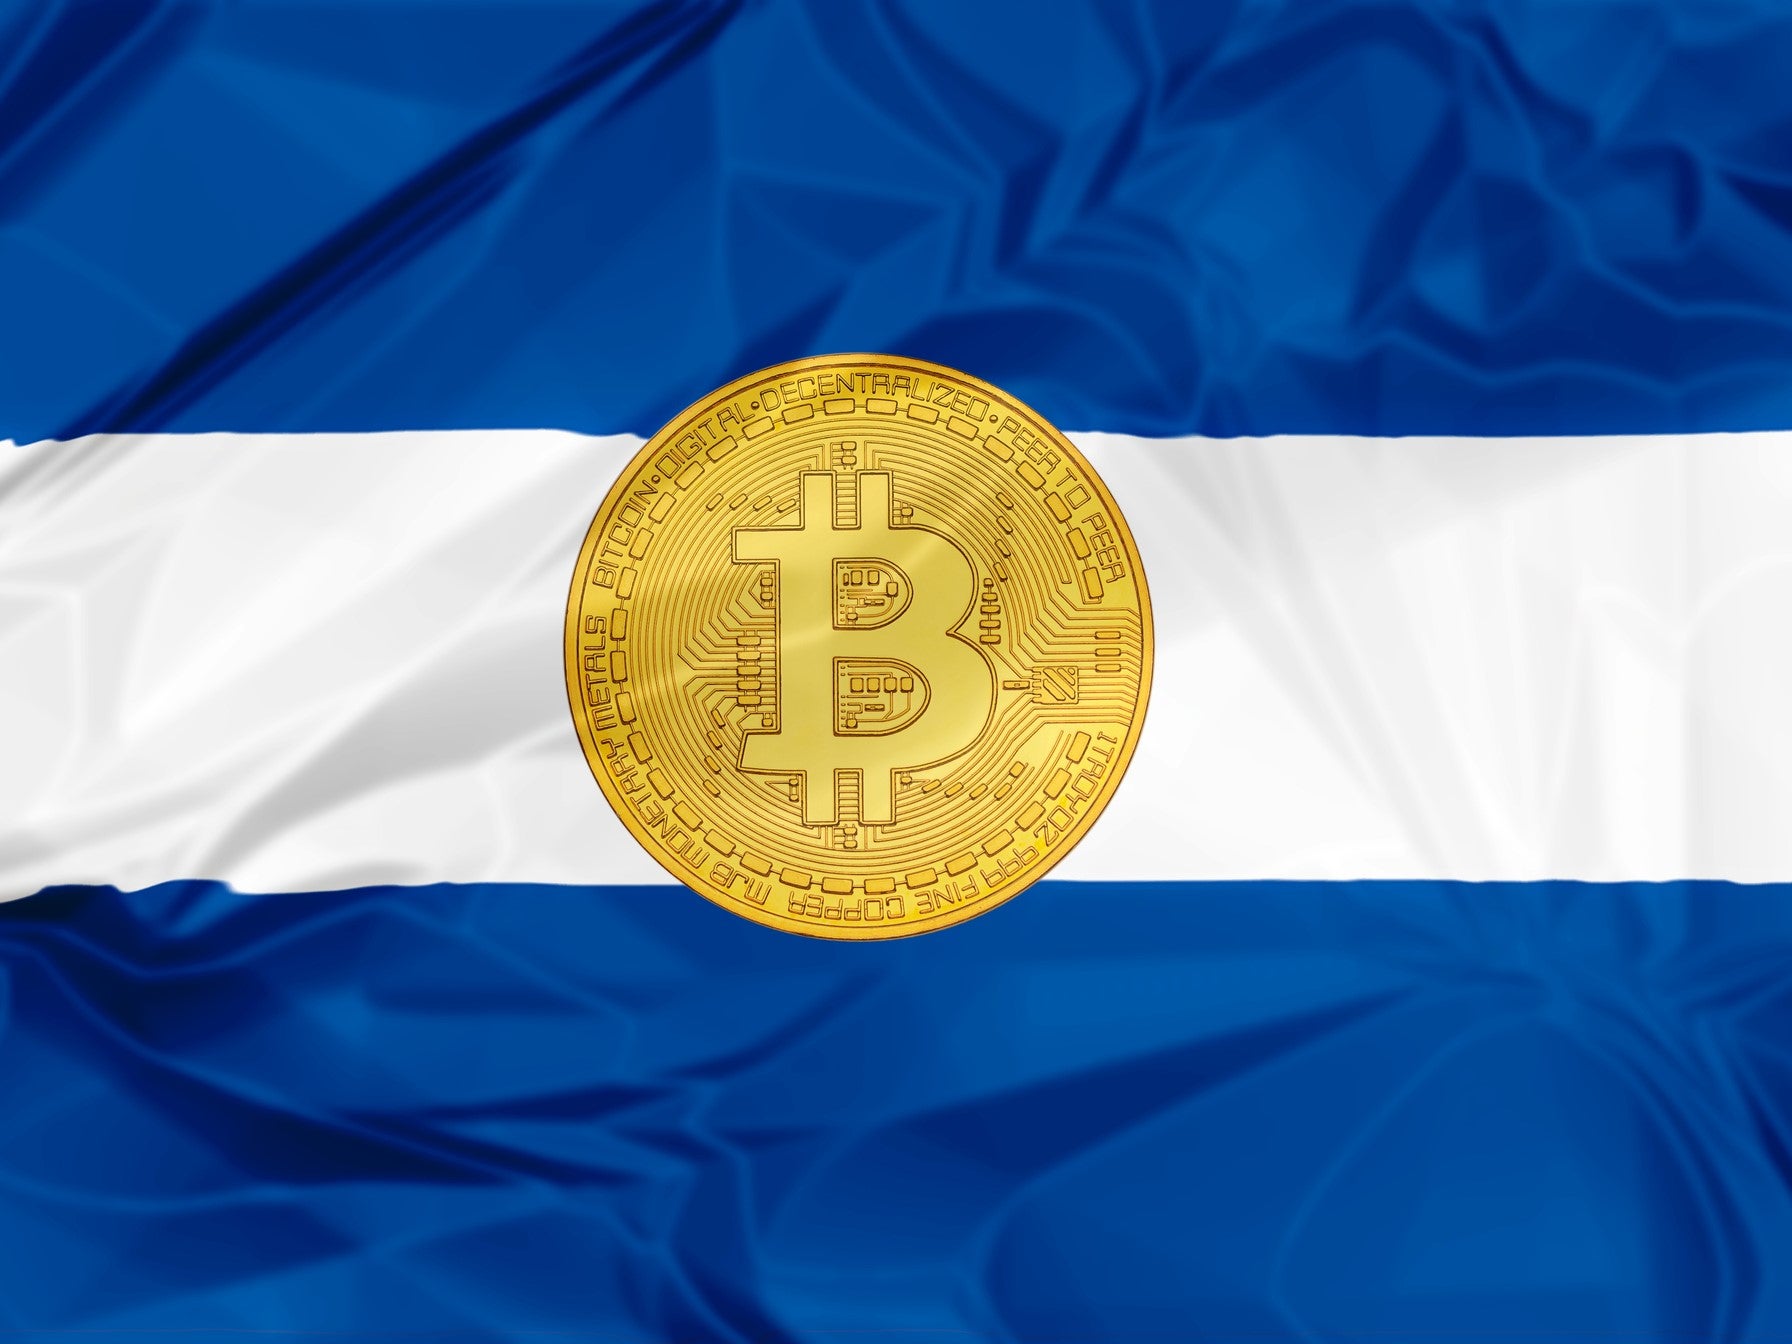 El Salvador became the first country in the world to adopt bitcoin as an official currency in September 2021